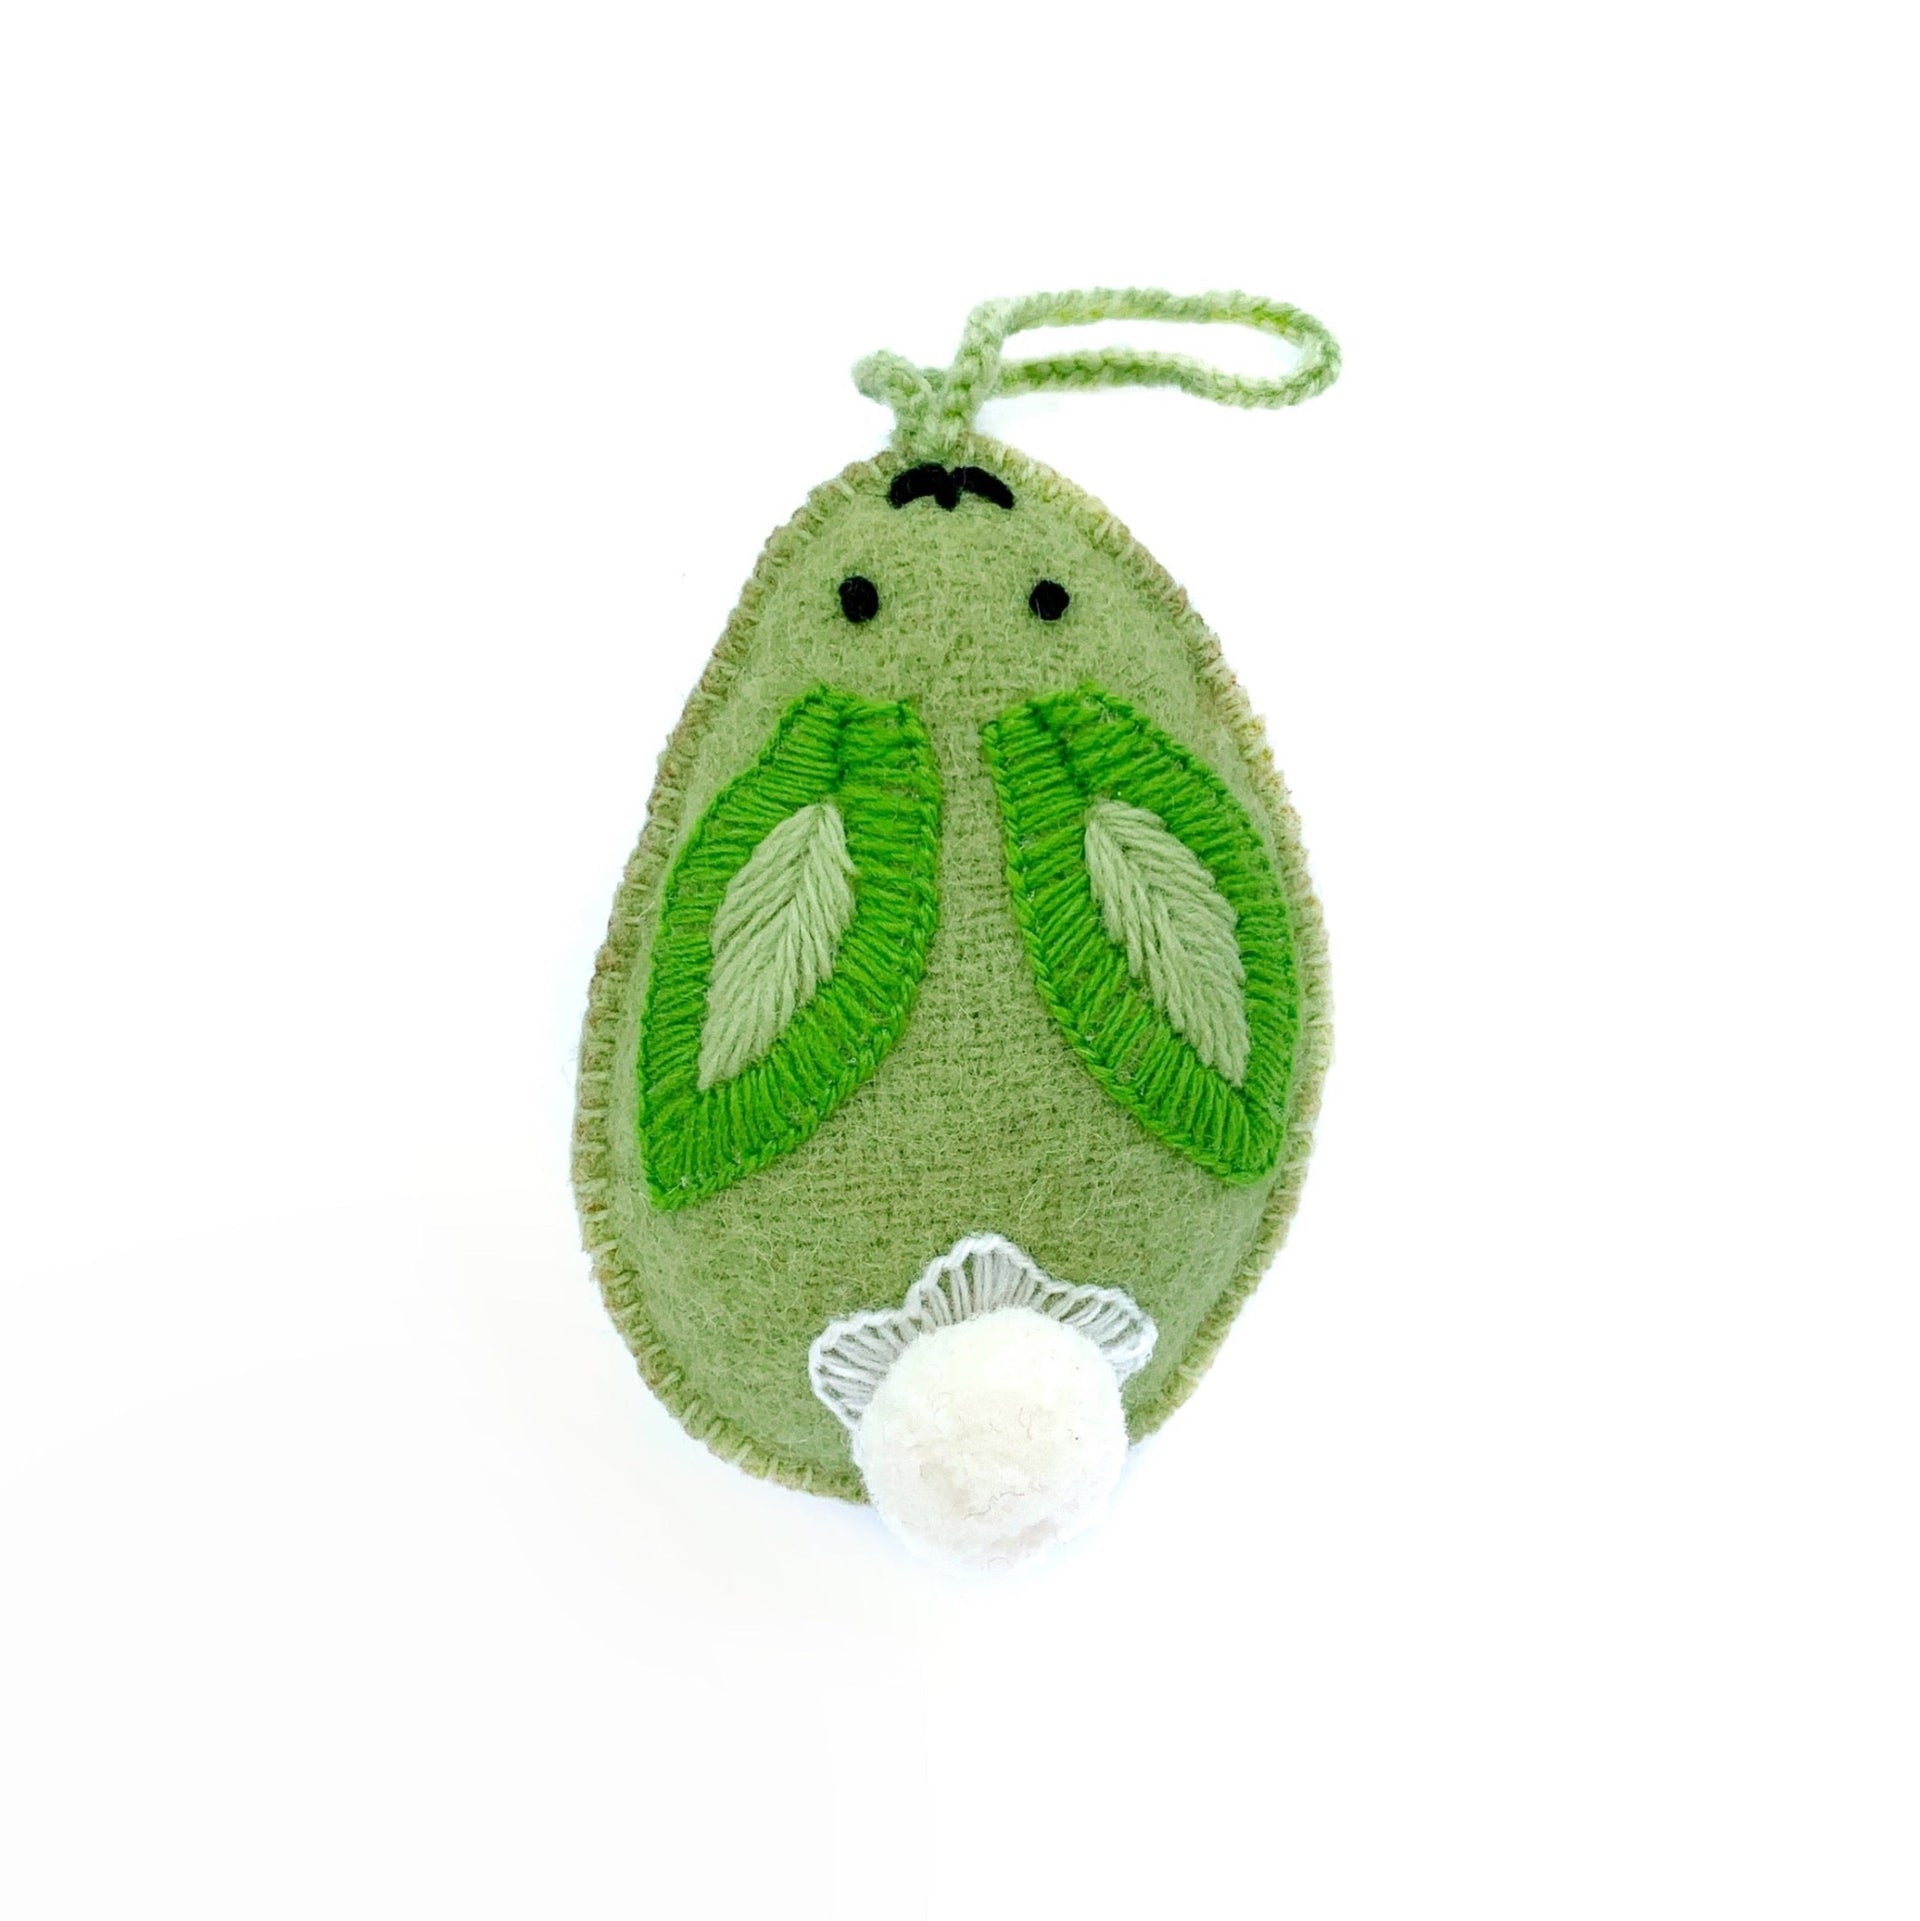 Green bunny egg Easter ornament with pom pom tail.